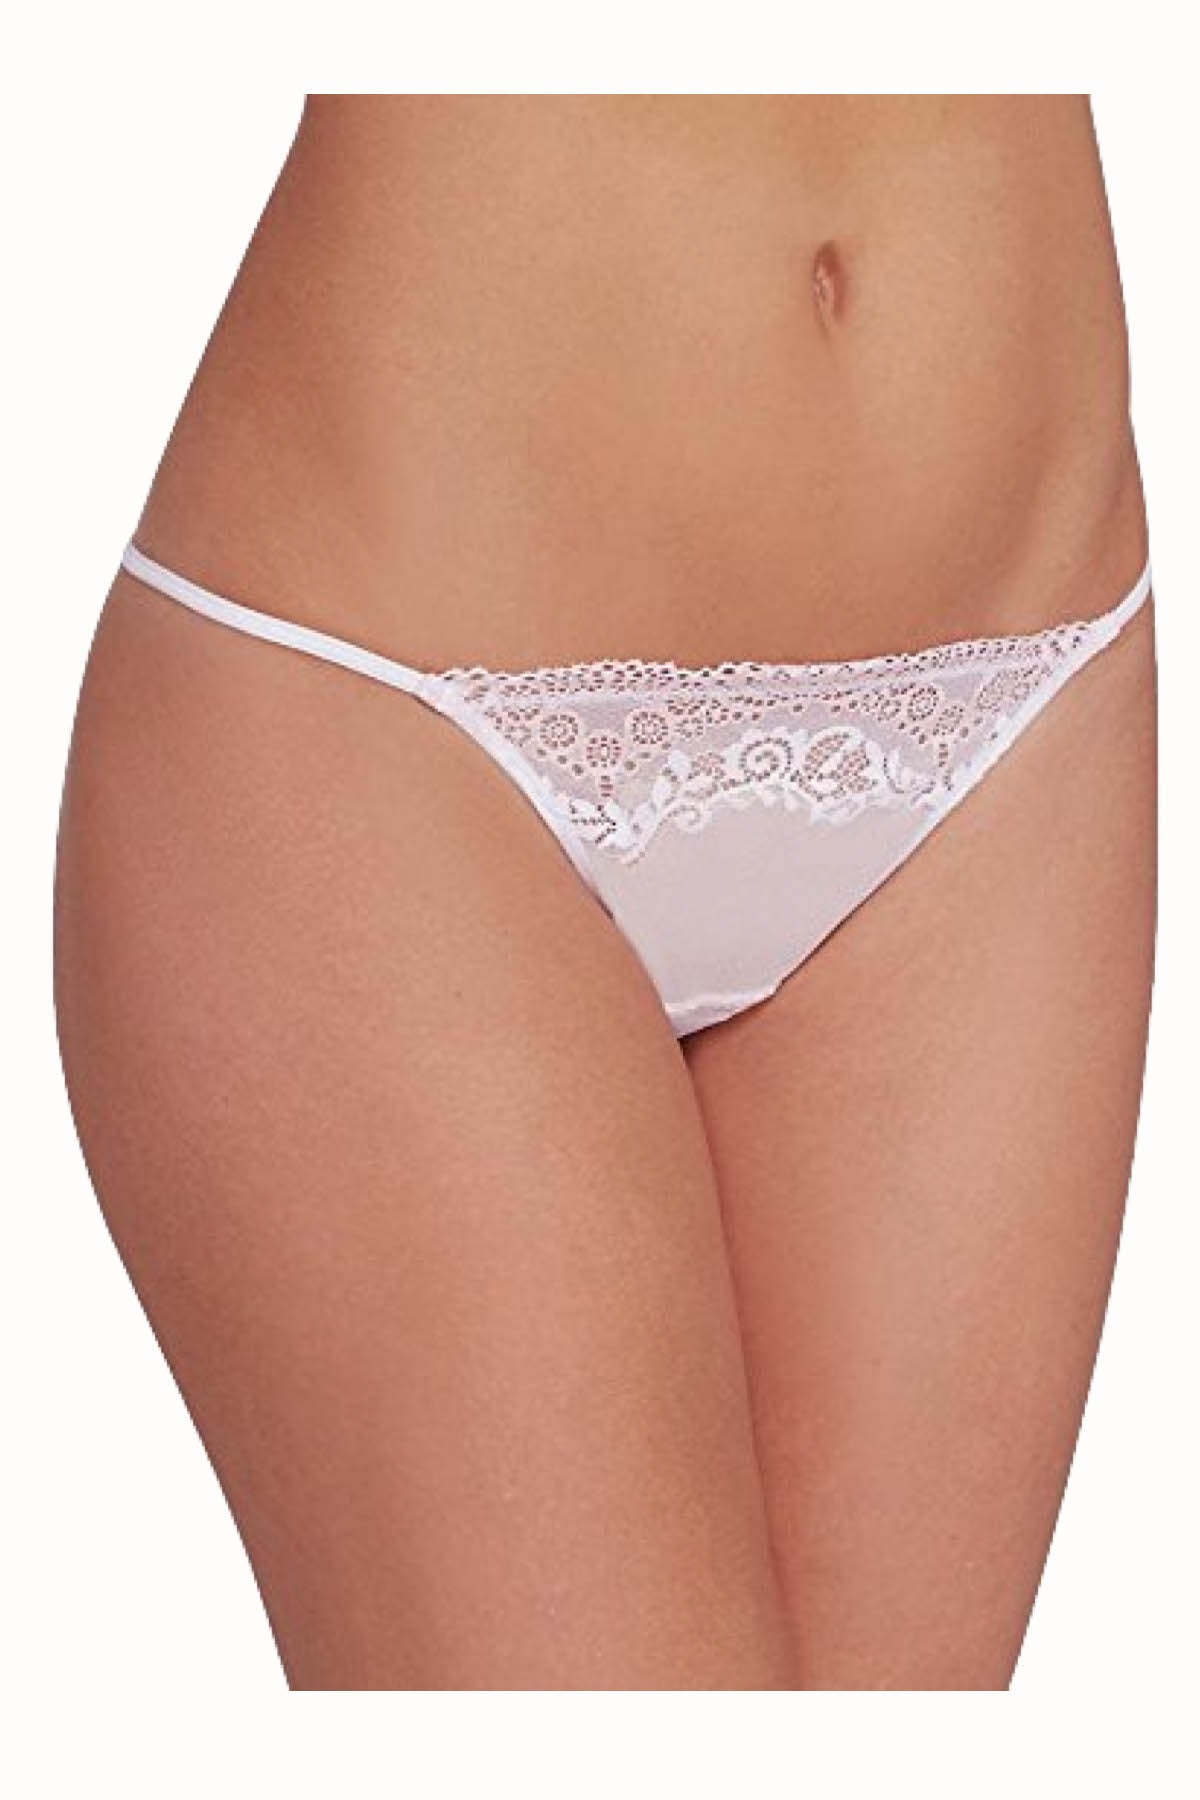 DKNY White/Ballet Pink Seductive Lights Lovely Lacy G-String